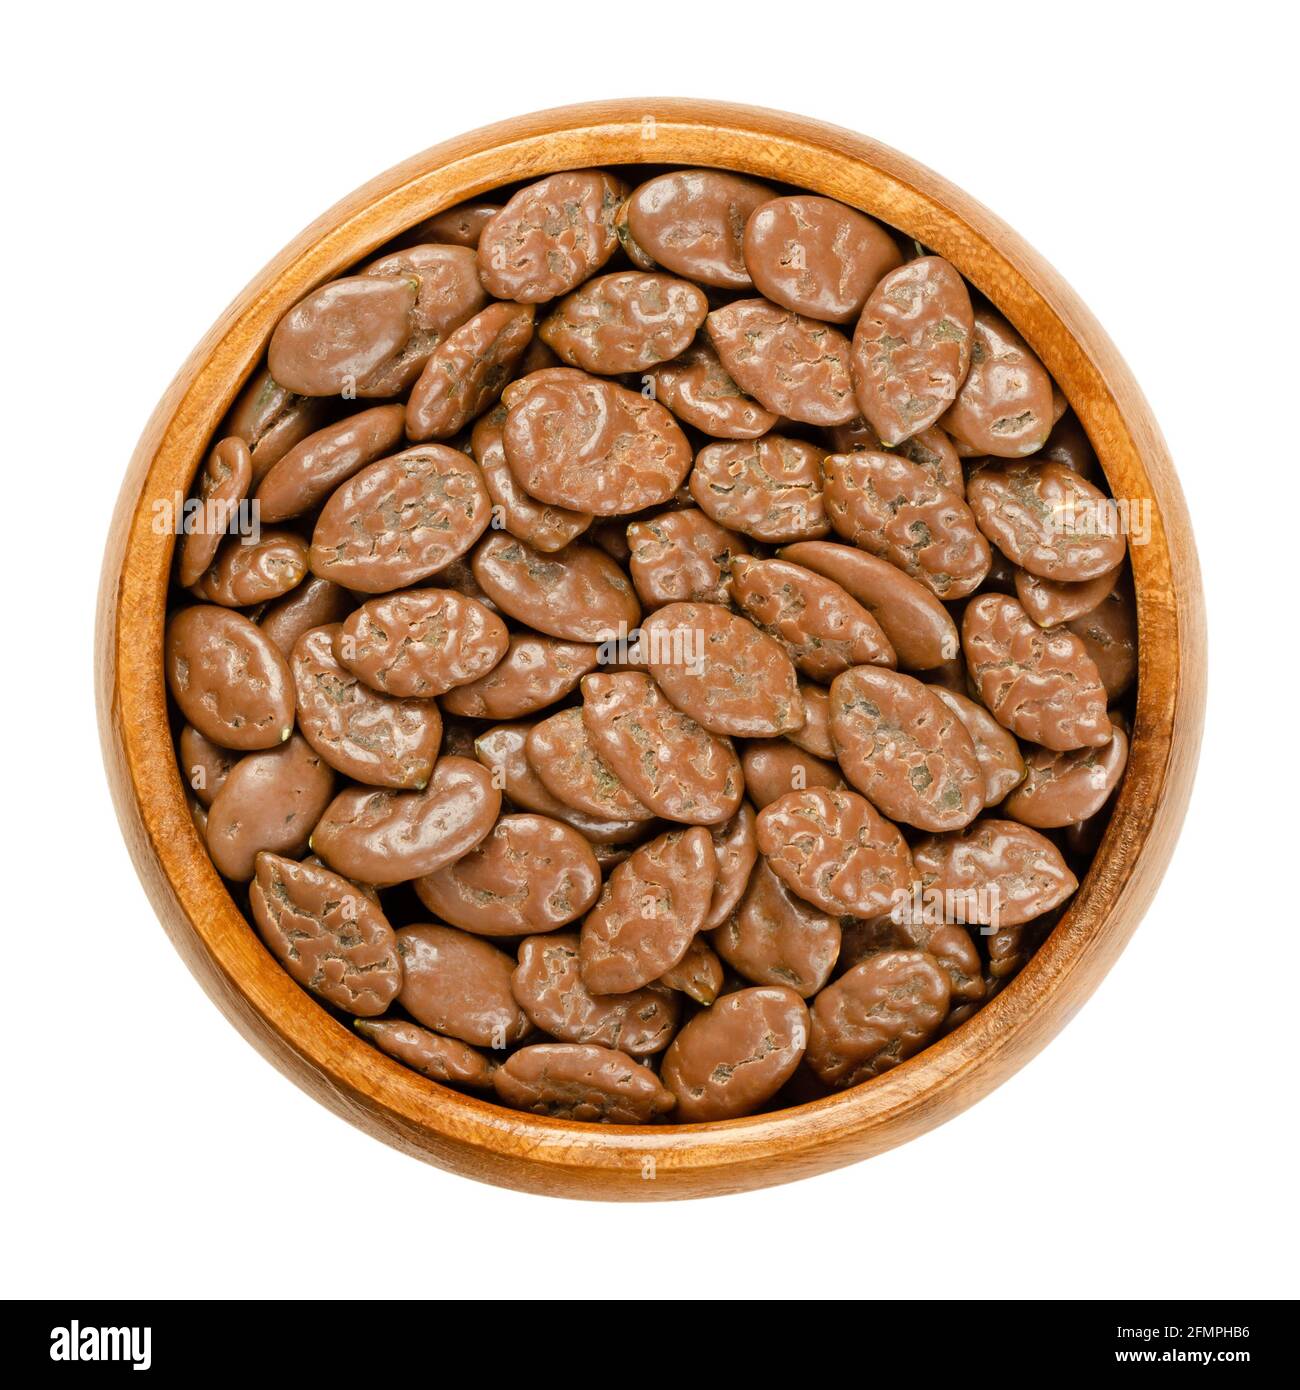 Roasted pumpkin seeds, coated with milk chocolate, in a wooden bowl. Snack of flat summer squash seeds, lightly roasted, and covered with chocolate. Stock Photo